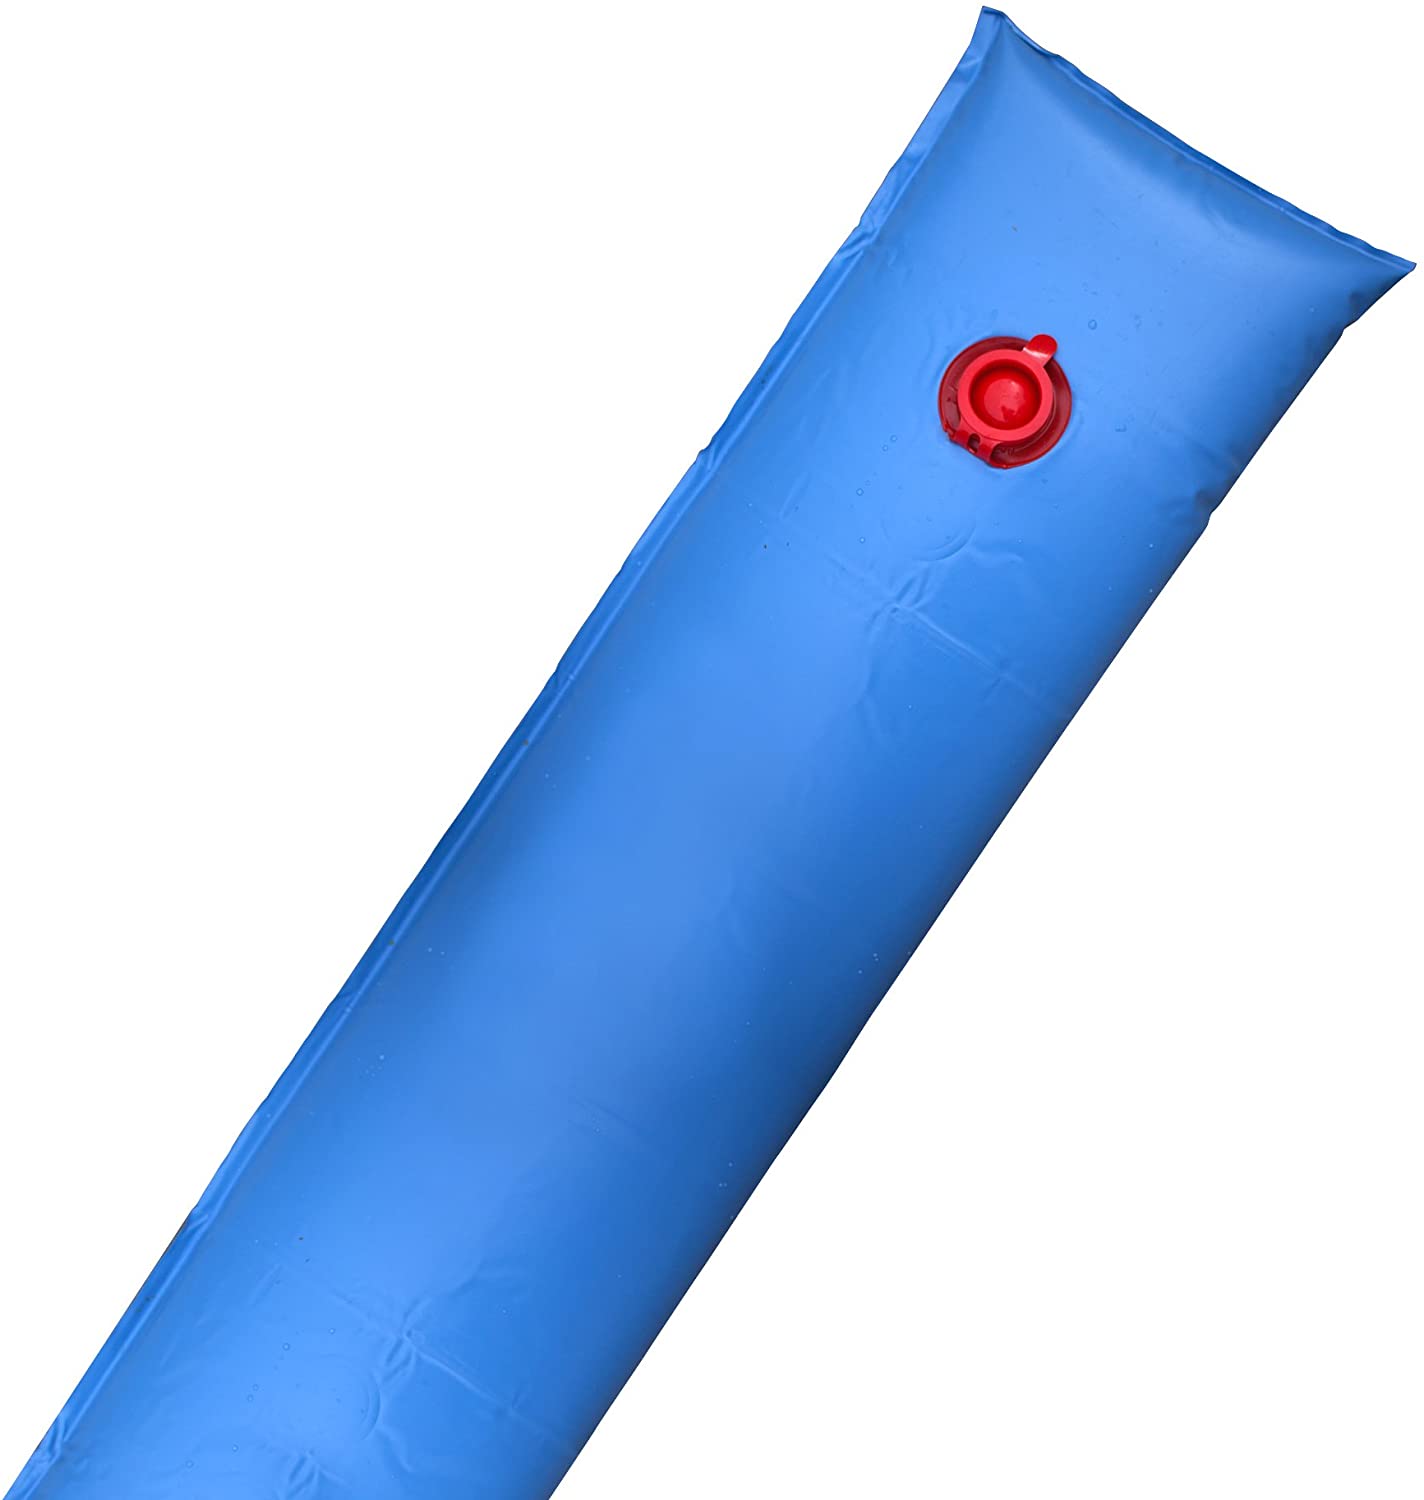 8 Ft Single Std Water Tube-Blue - LINERS